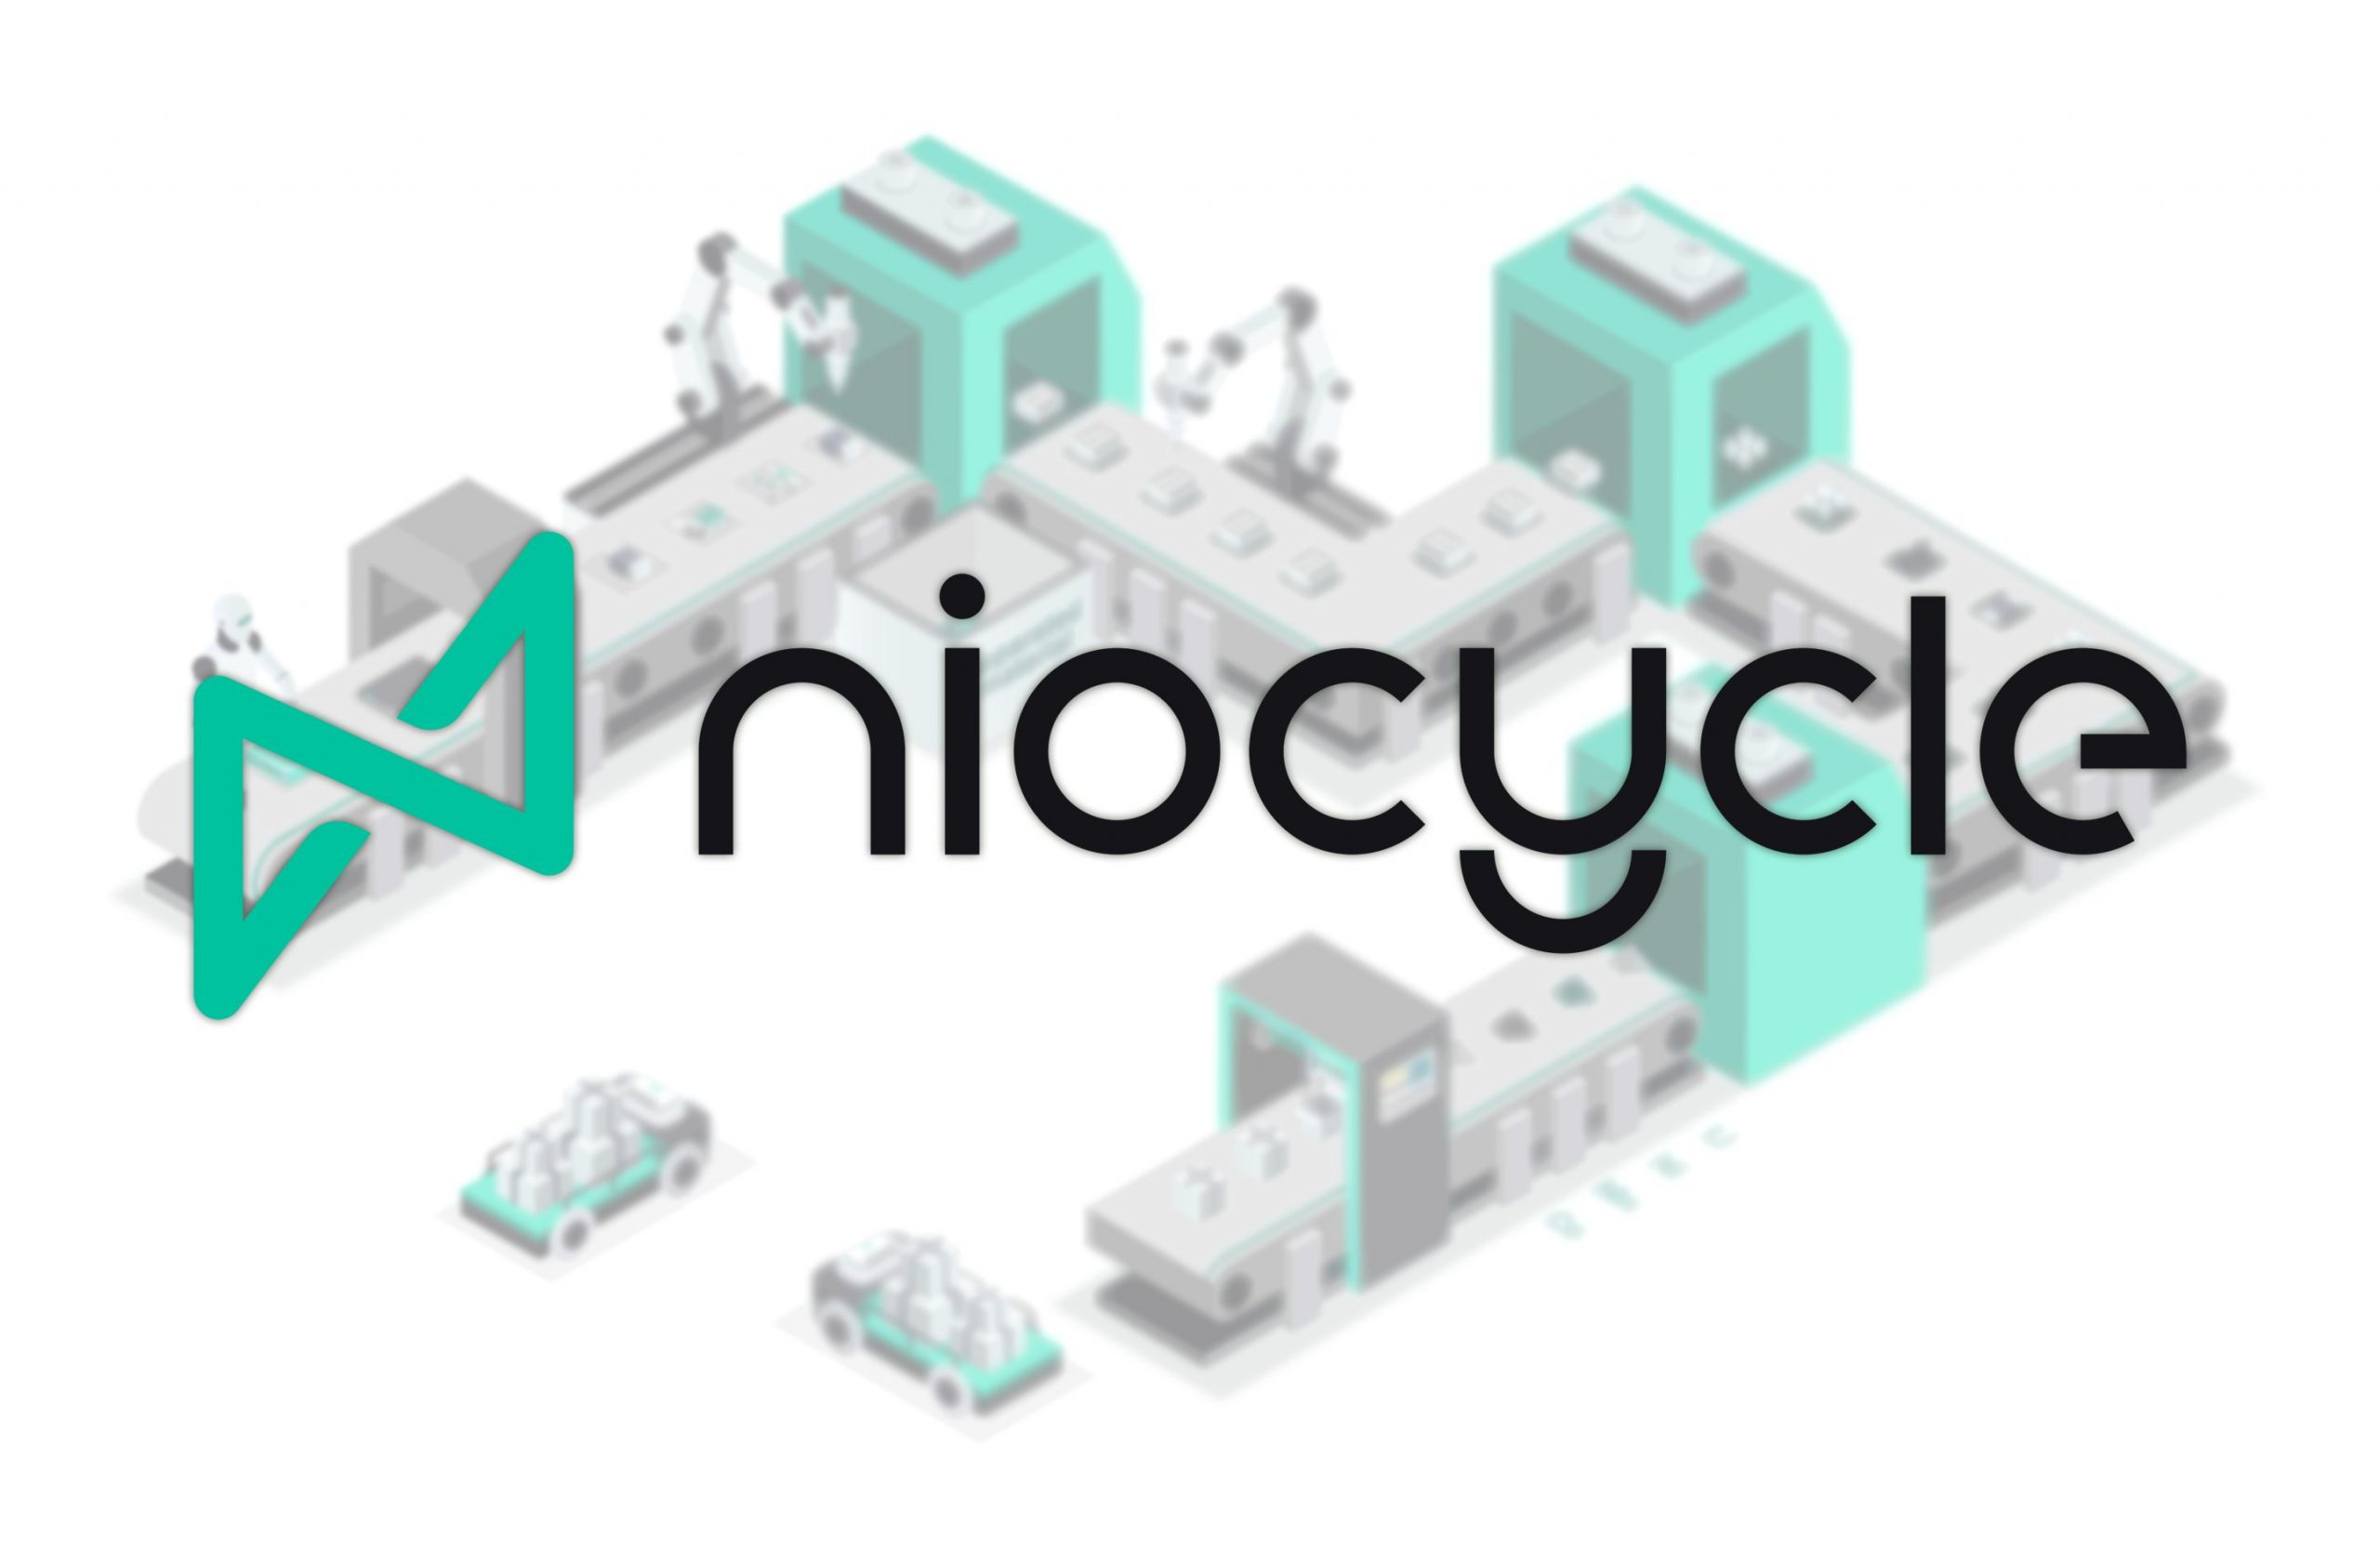 NIOCYCLE TECHNOLOGIES POISED TO ADVANCE GAME-CHANGING LITHIUM-ION BATTERY  RECYCLING SOLUTION - NIOCYCLE